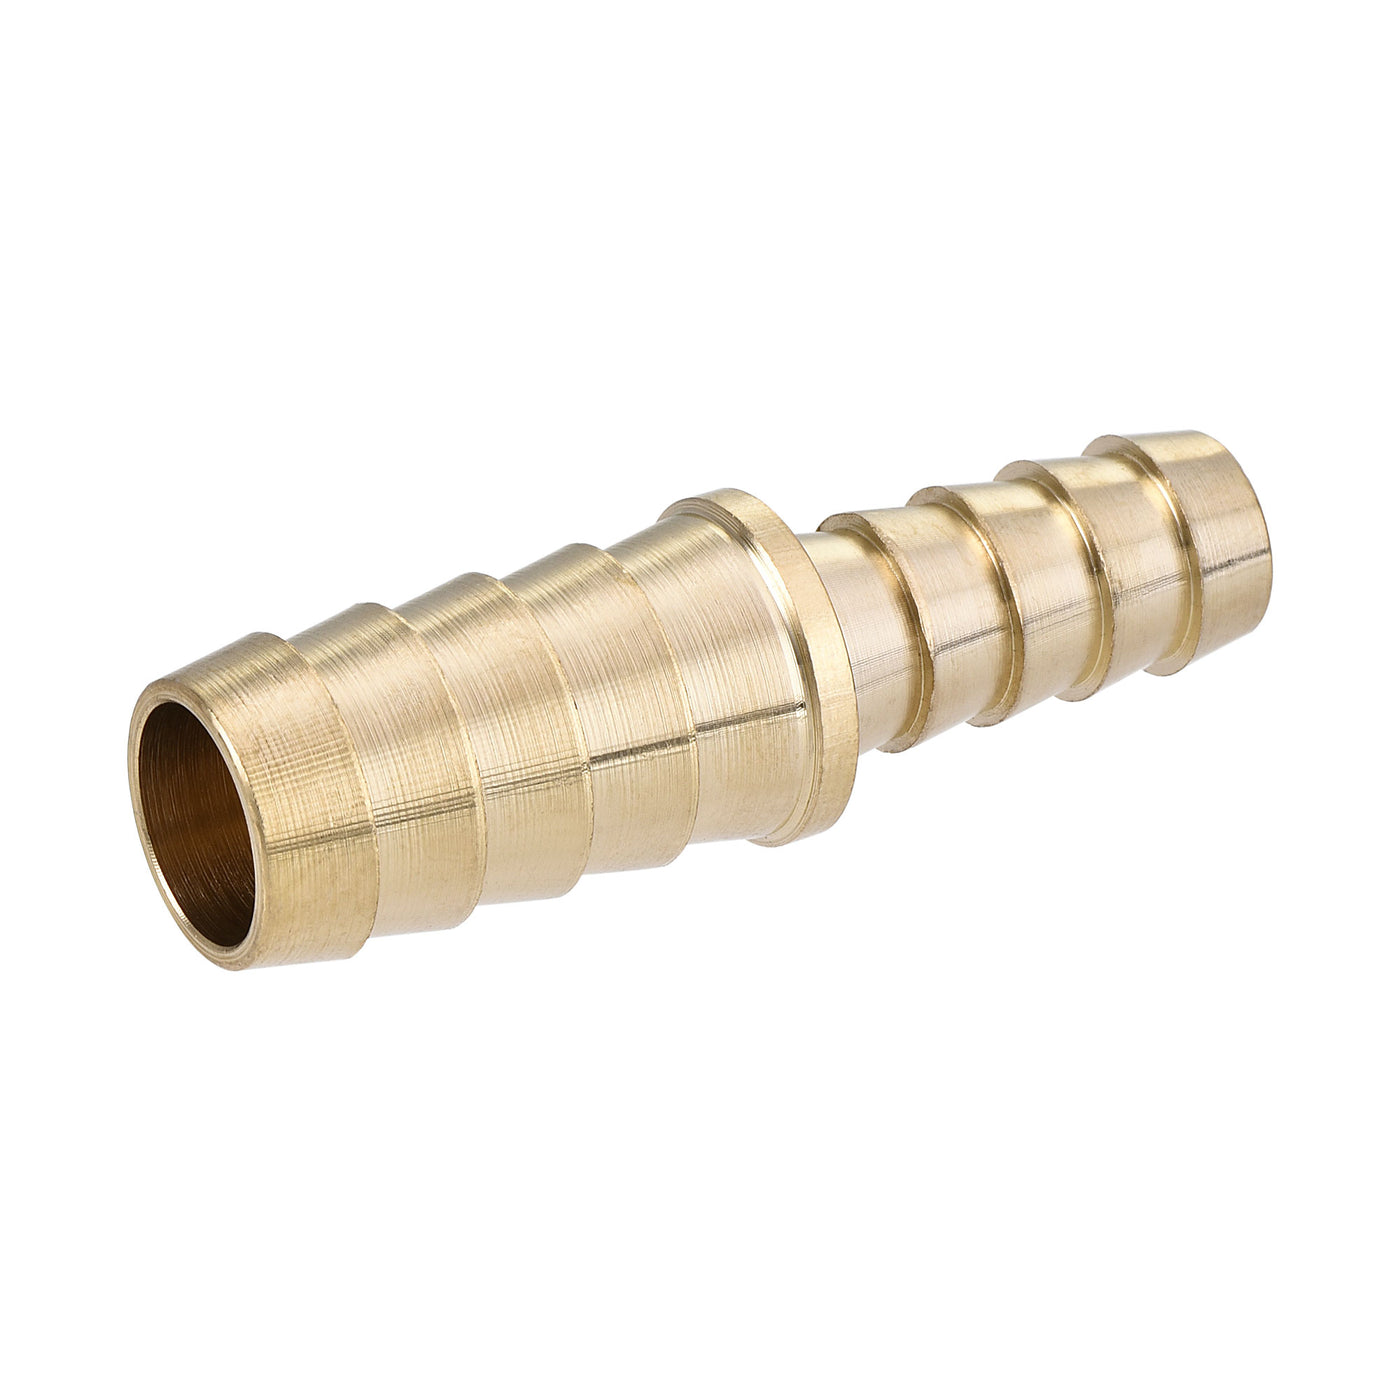 uxcell Uxcell Hose Barb Fitting, 1/2x3/8inch Brass Hollow Straight Quick Connector for Water Fuel Air Oil Gas, Pack of 2